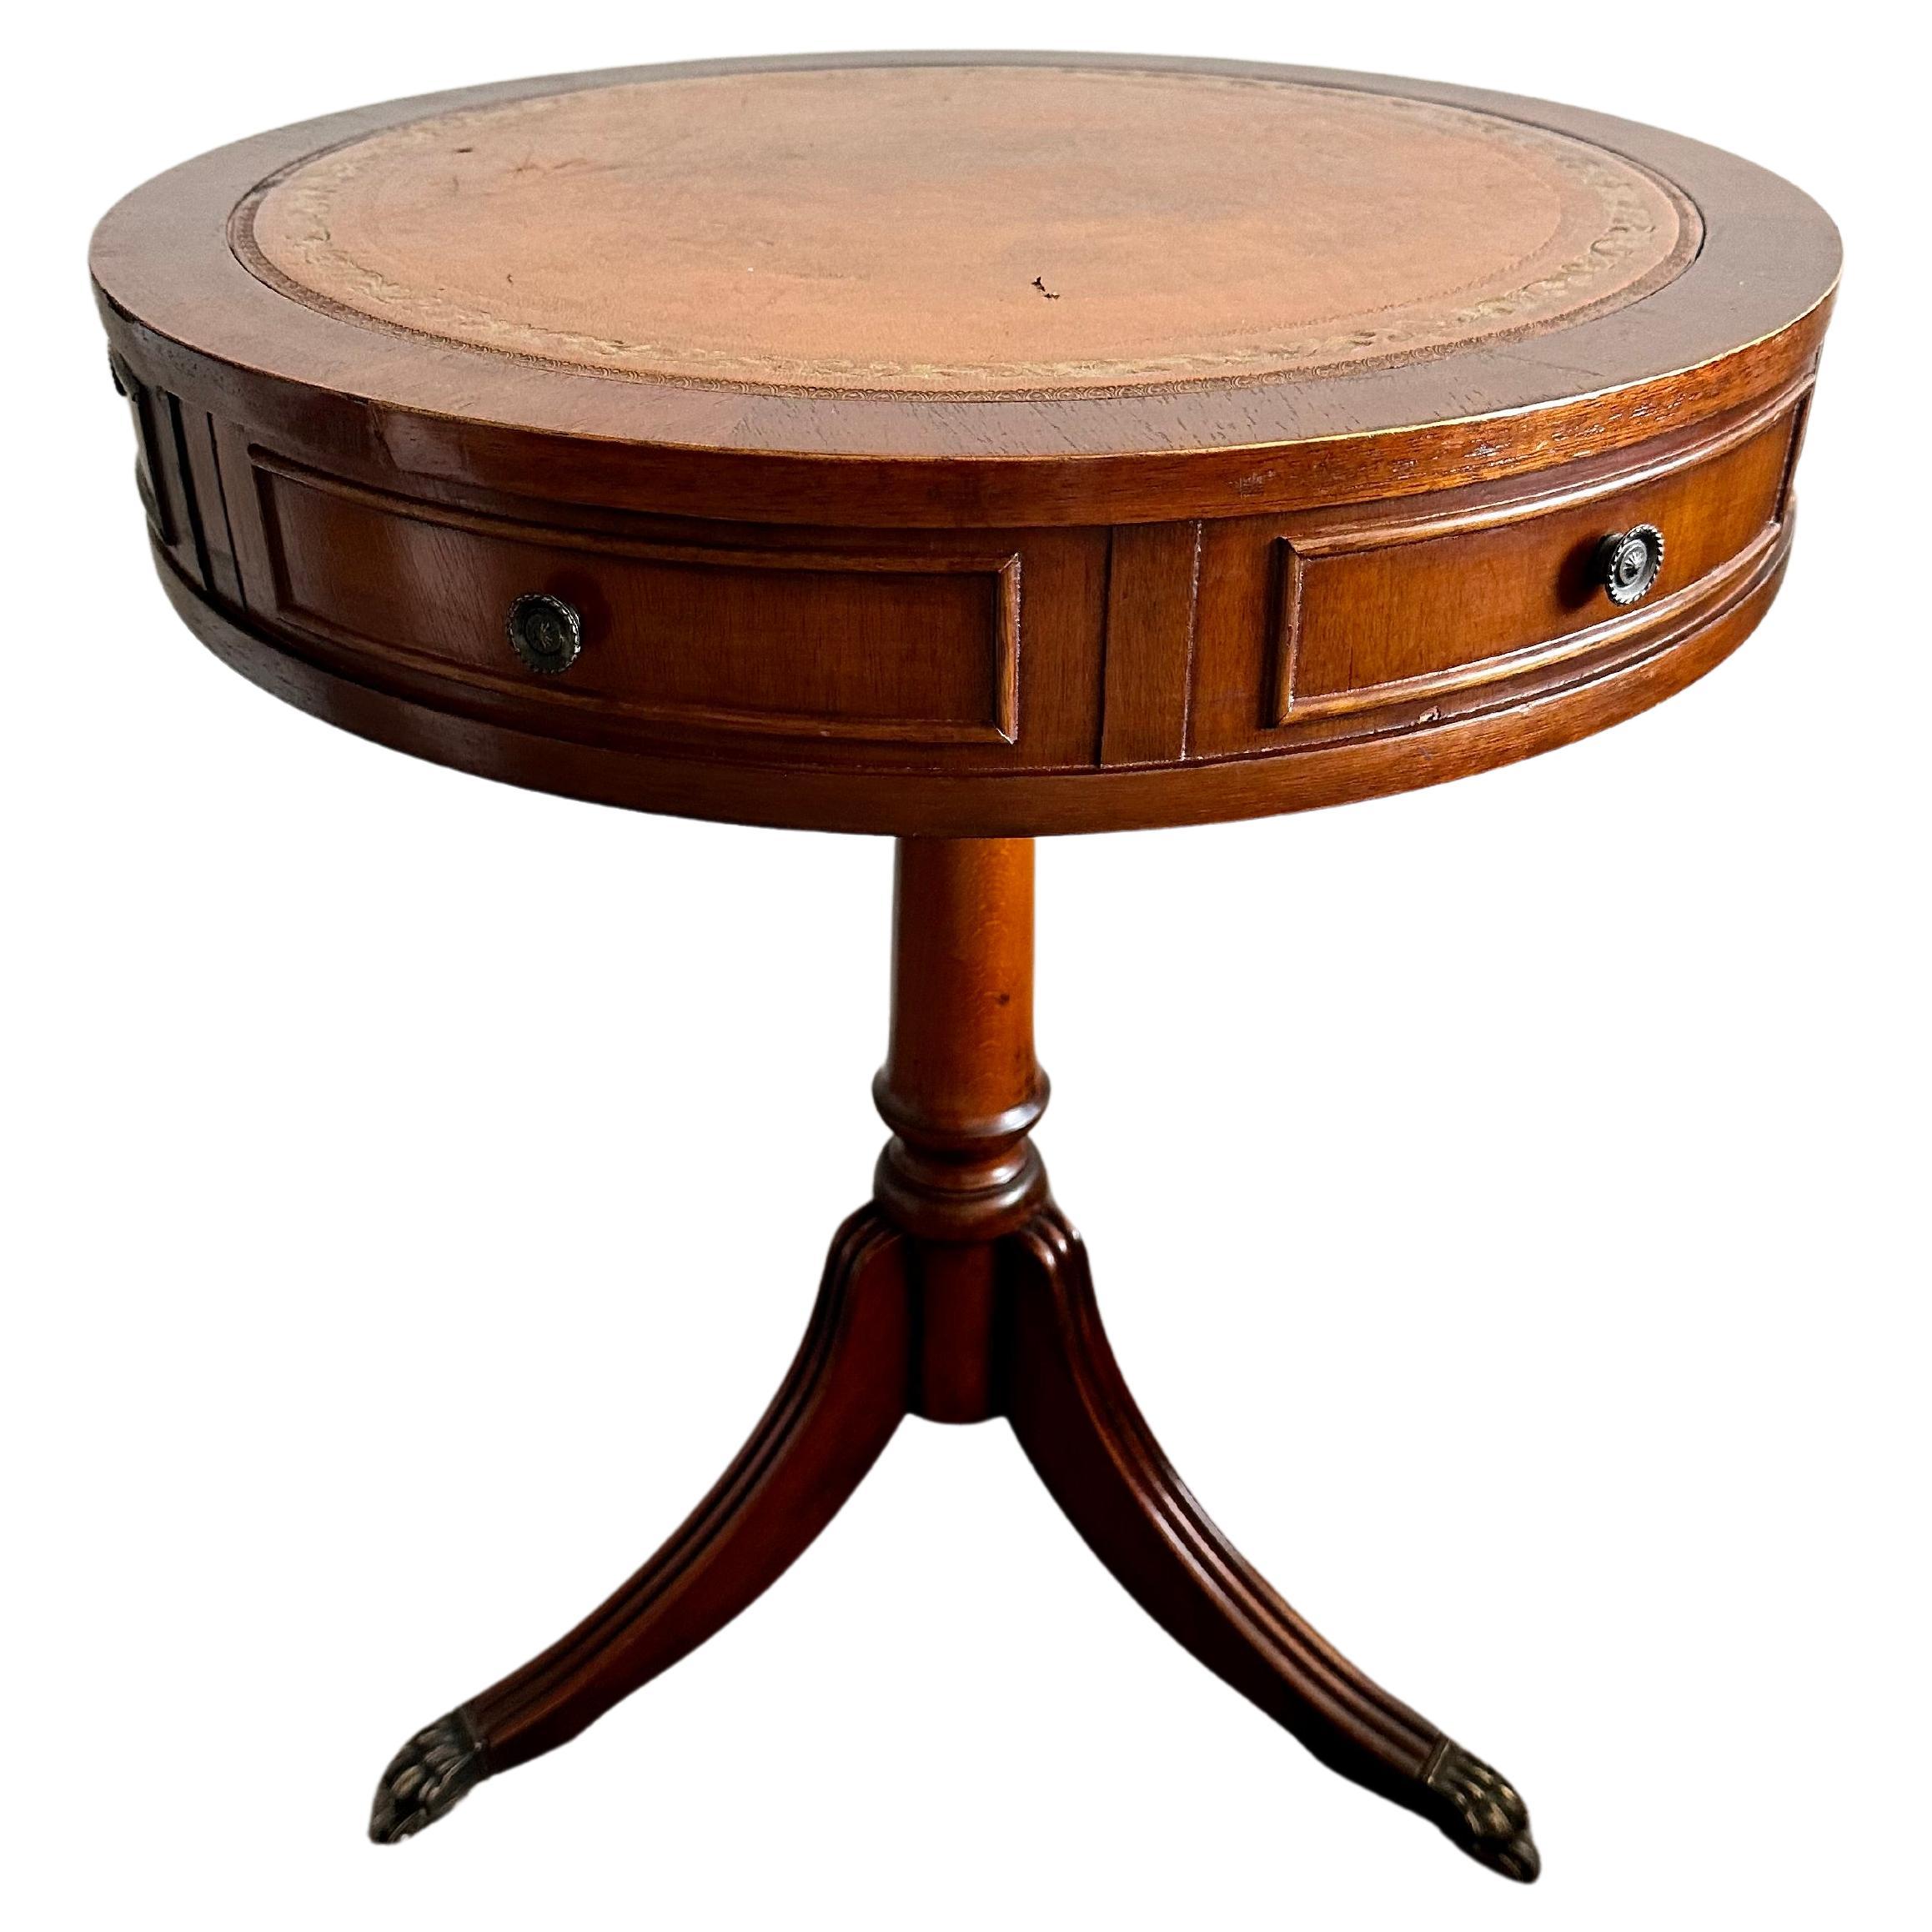 Regency Style Tan Leather Drum Side End Table with Drawers